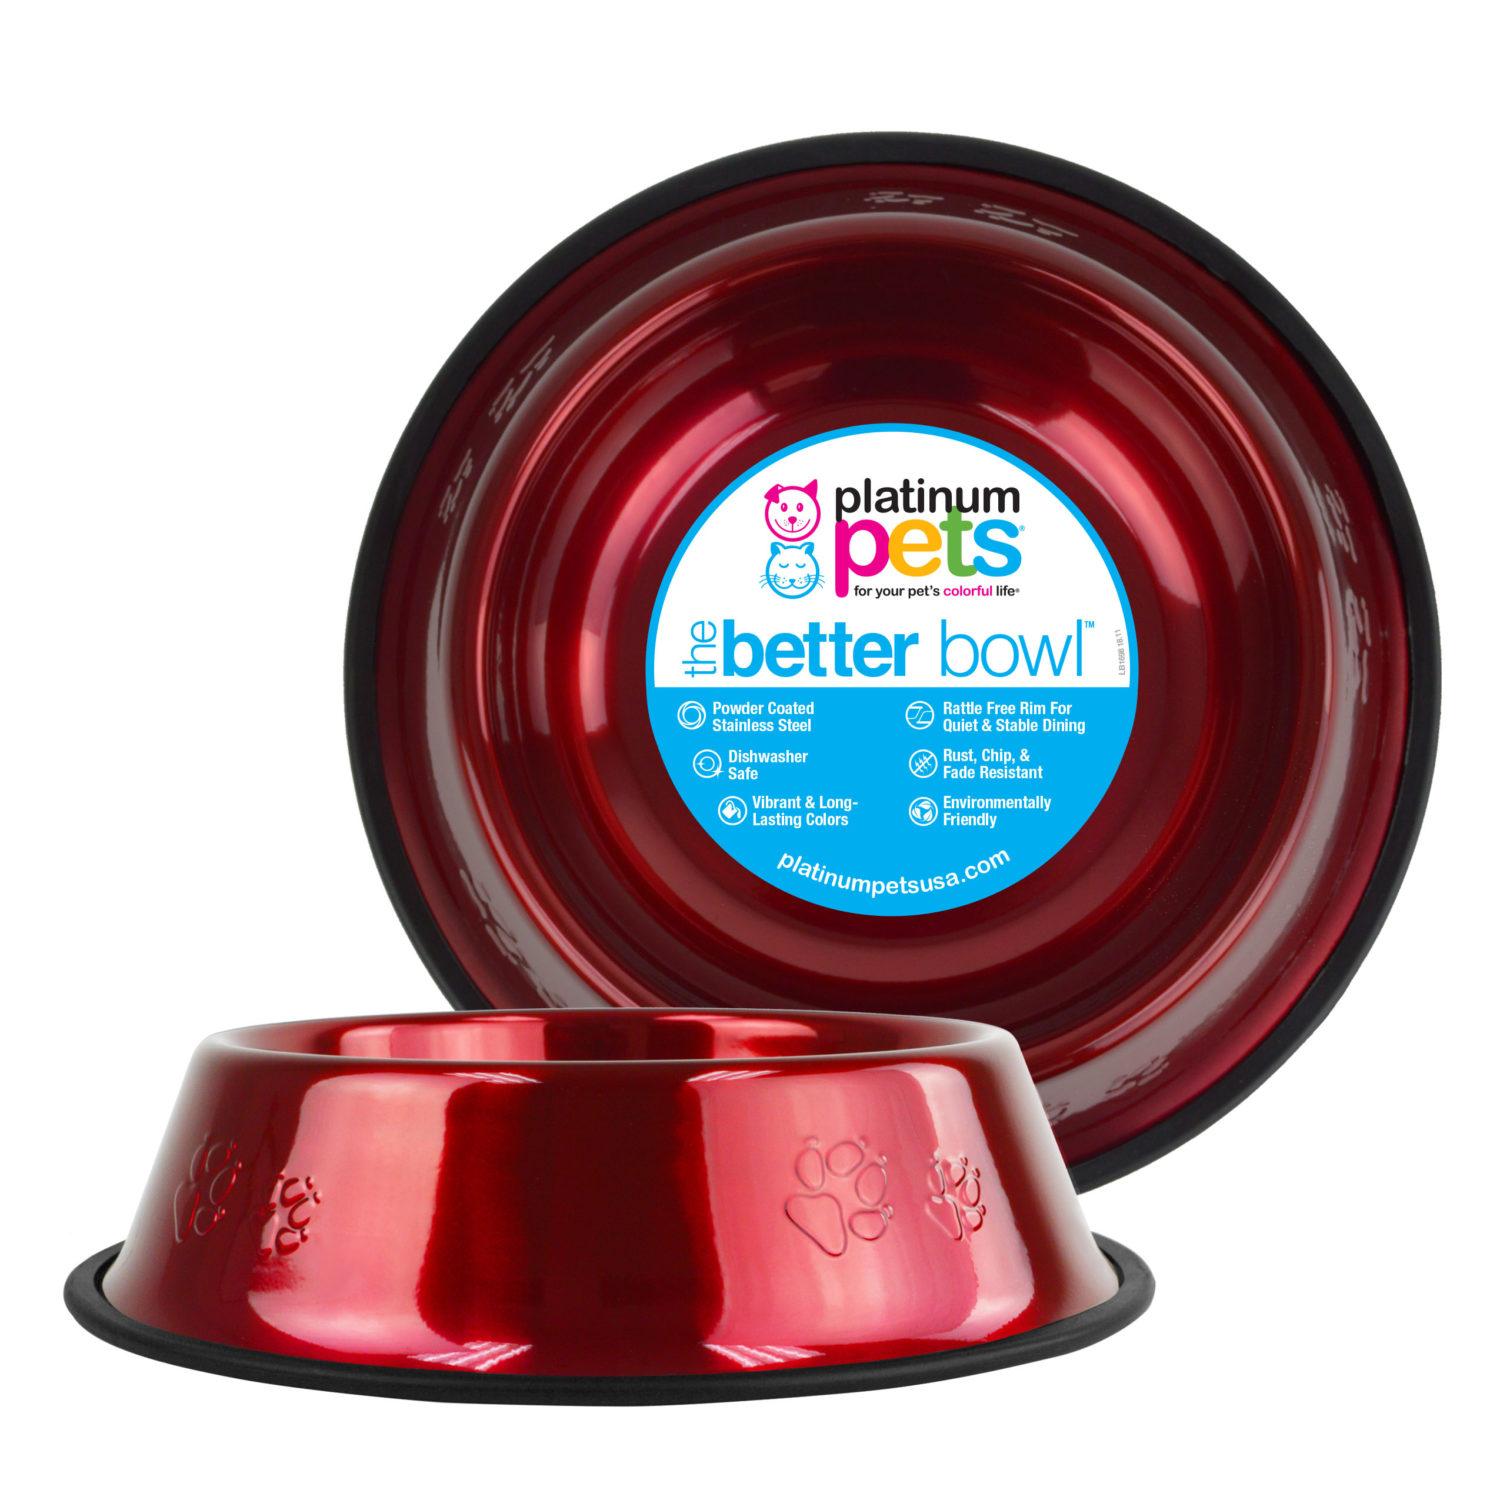  Platinum Pets Non- Tip Bowl - Candy Apple Red